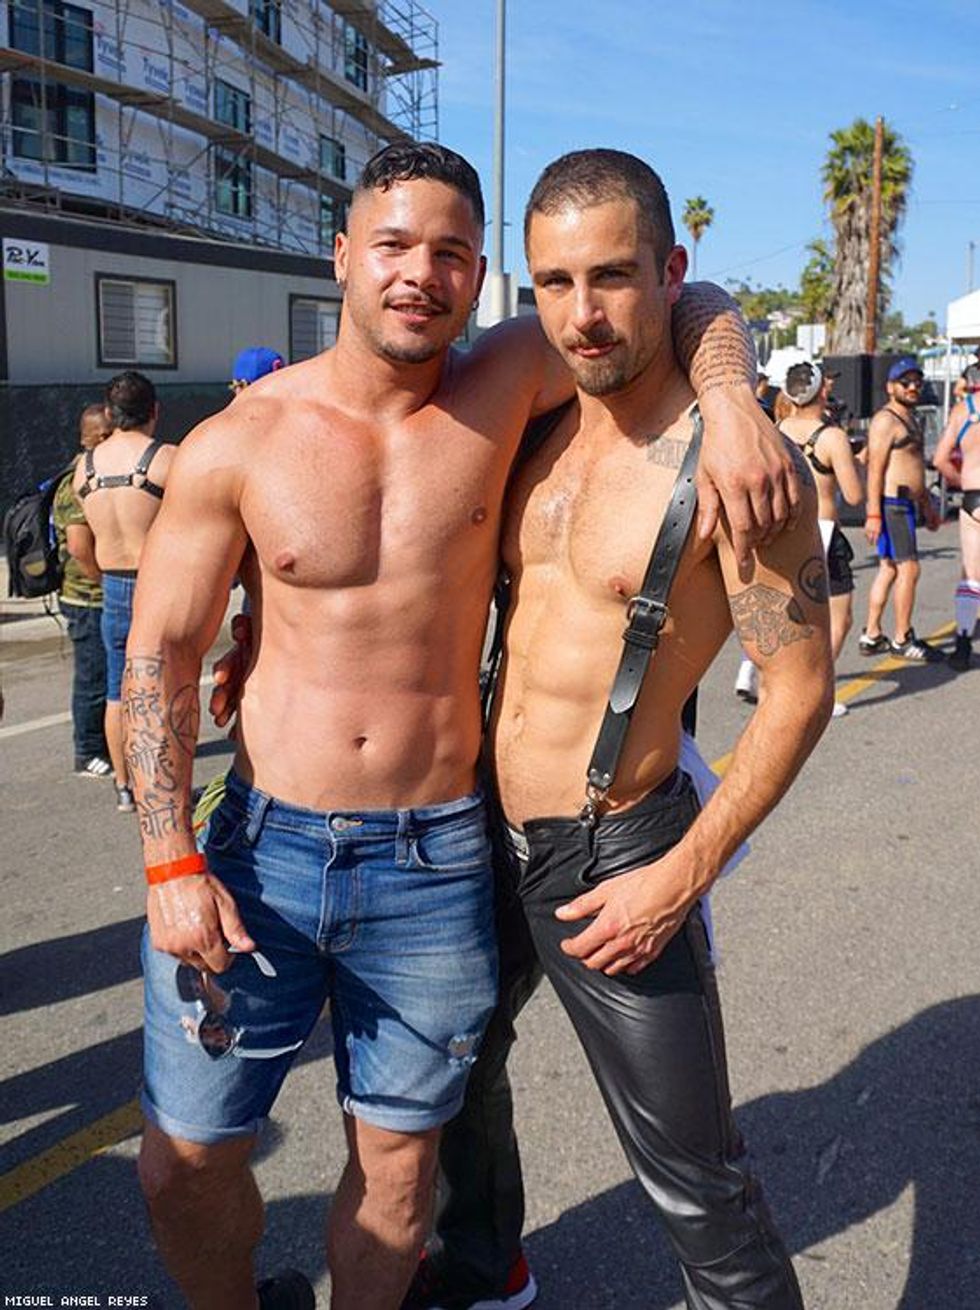 PHOTOS: Off Sunset Festival gives LA Leather Pride a happy ending